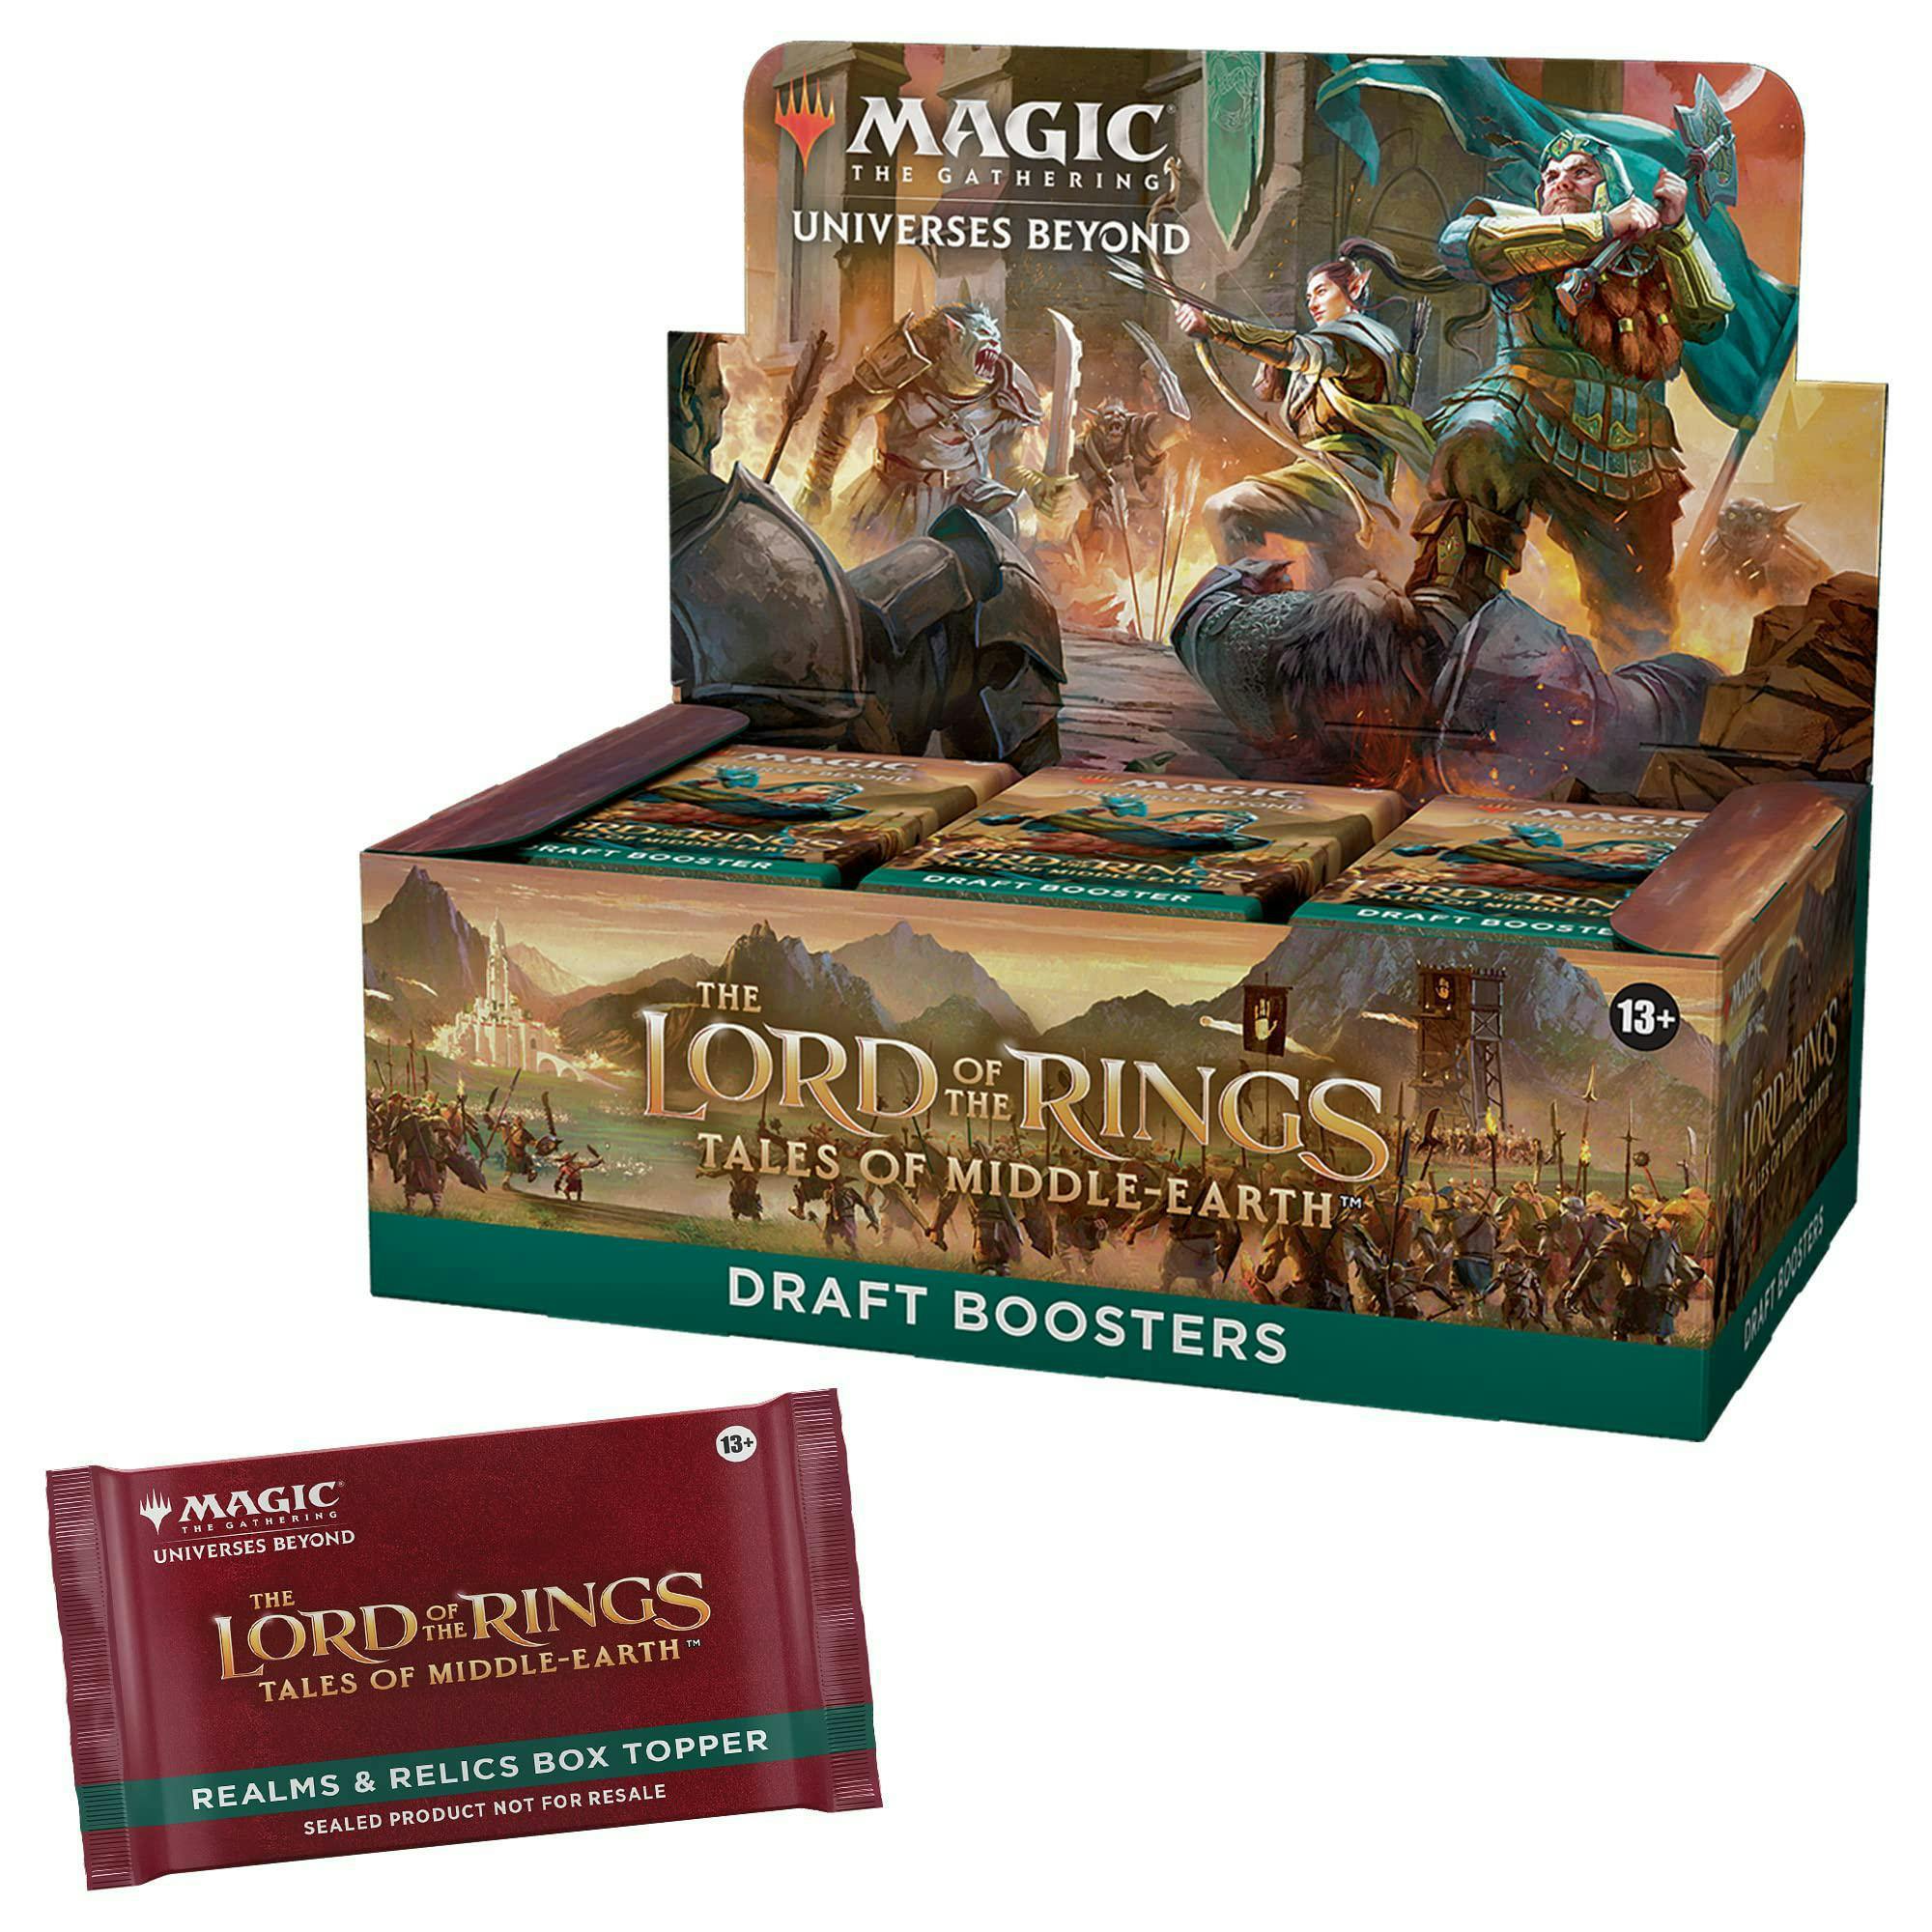 LotR Tales of Middle-Earth Draft Booster - 98cc05acd2dc559dfe7258a39dfa332f